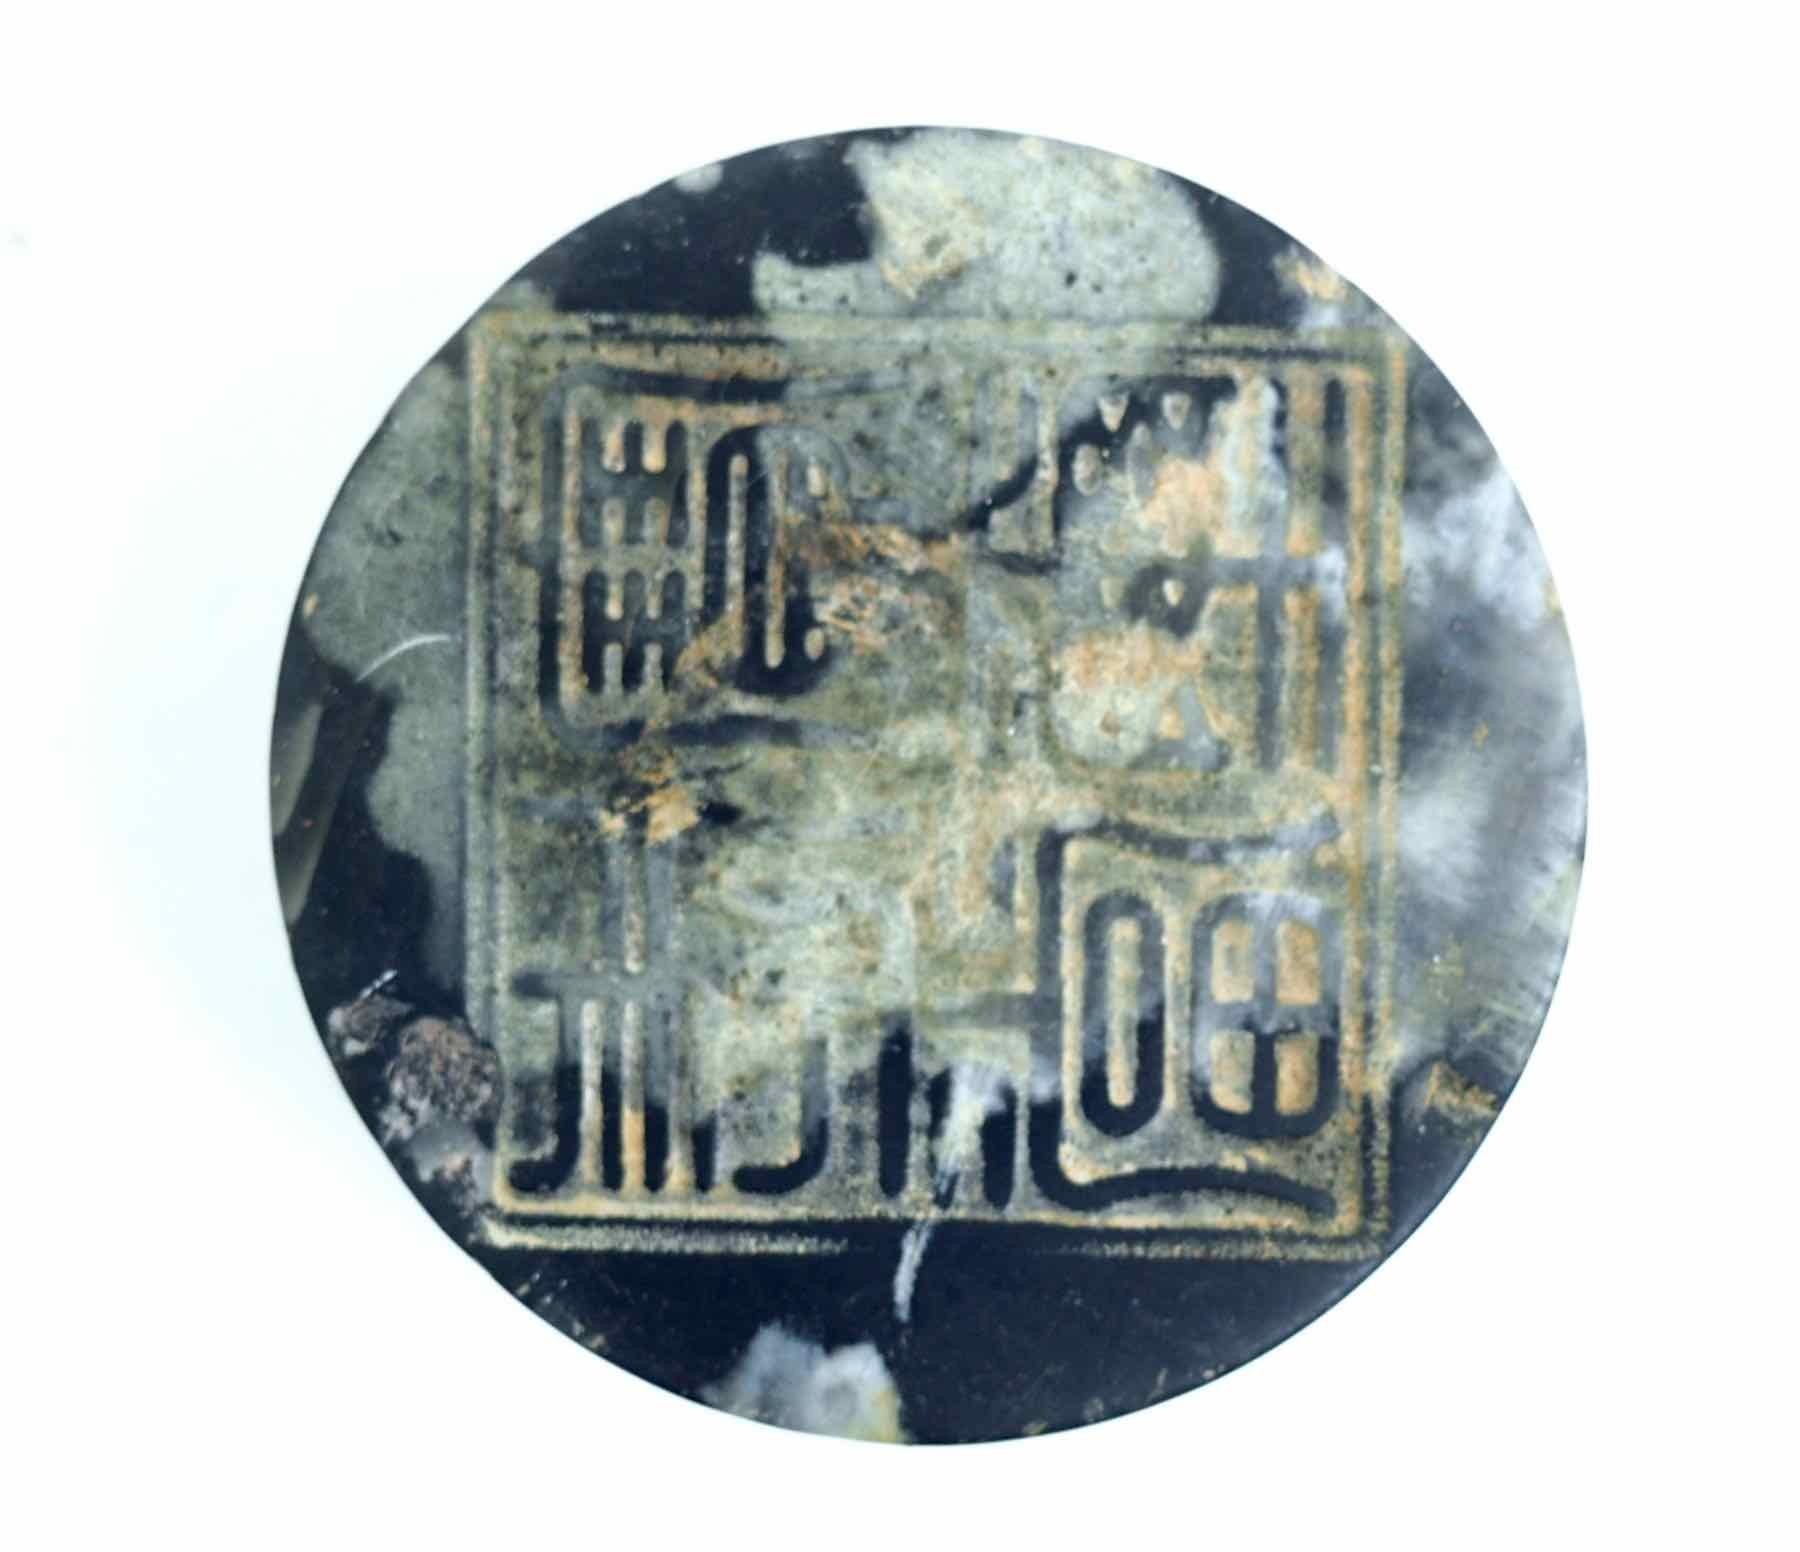 Probably Chinese jade stamp, 18th-19th century.